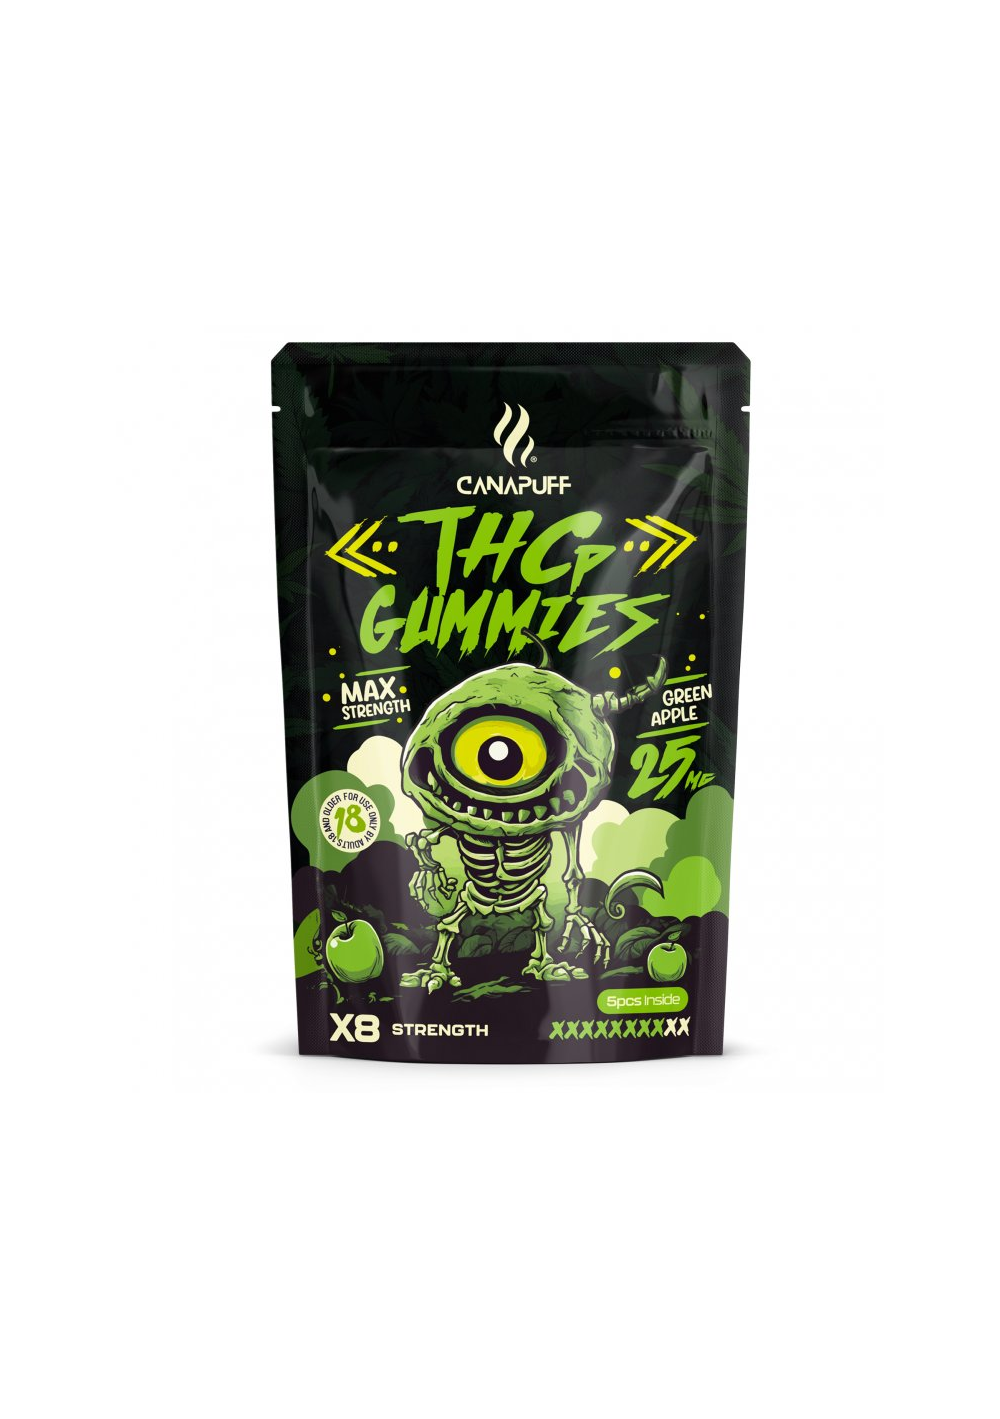 THC-P Caramelle Gommose Mela Verde, 5 pcs, 25 mg THCP - Extra Forte - Canapuff